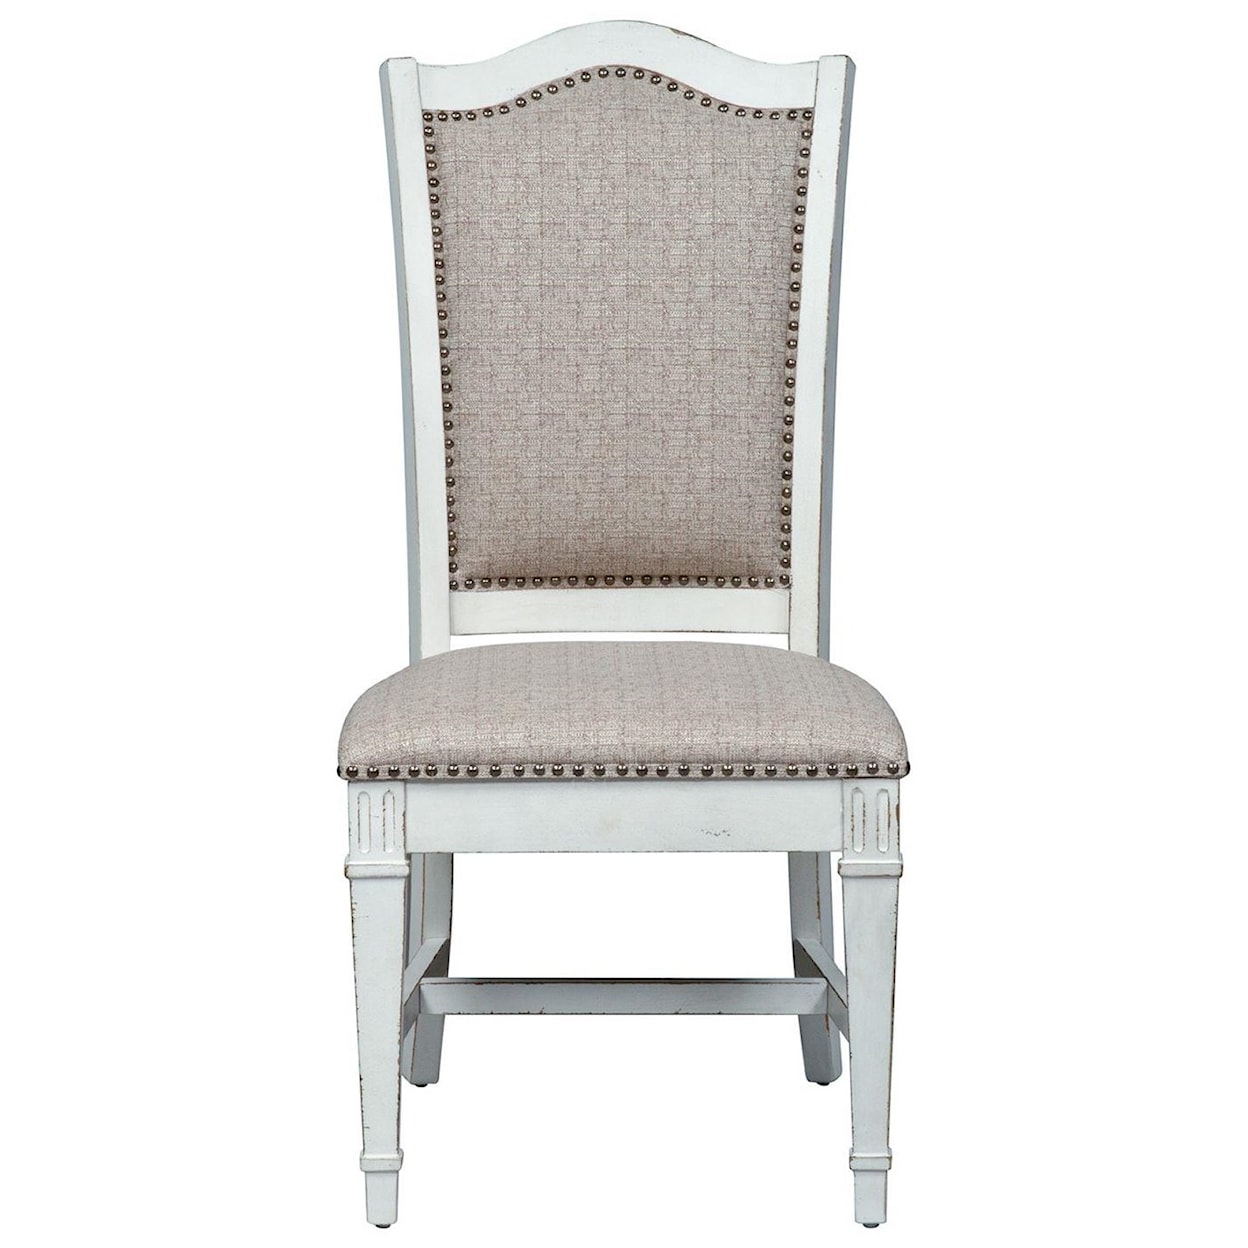 Freedom Furniture Abbey Park Upholstered Side Chair